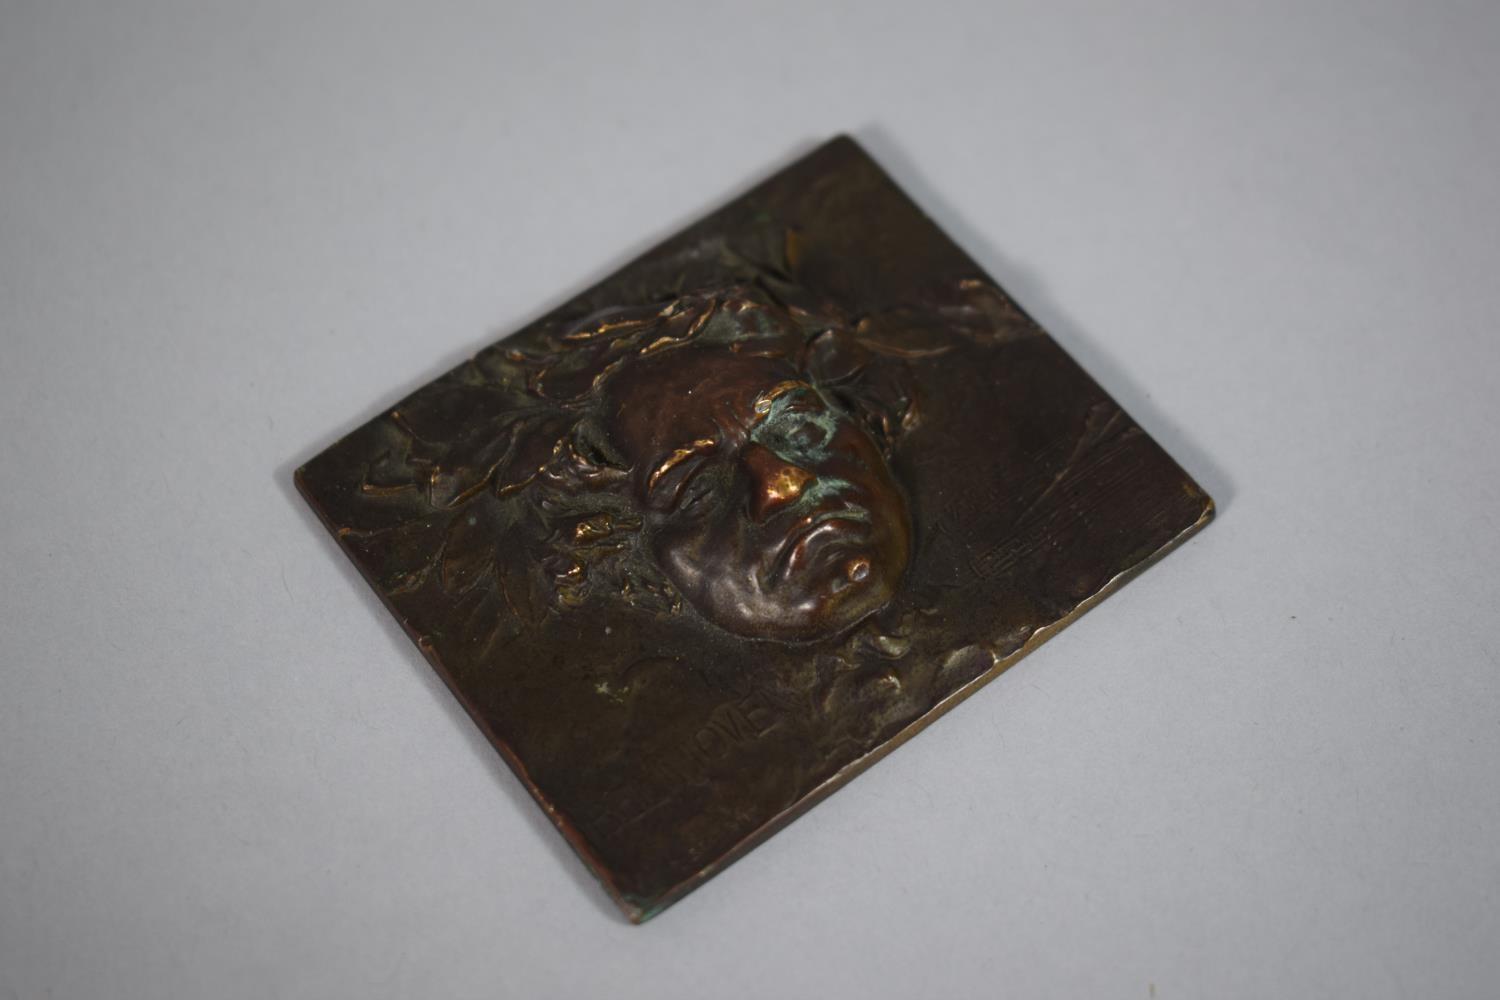 A Bronze Portrait Plaque of Beethoven by Franz Stiasny, 6.5 x 5.5cms - Image 2 of 2